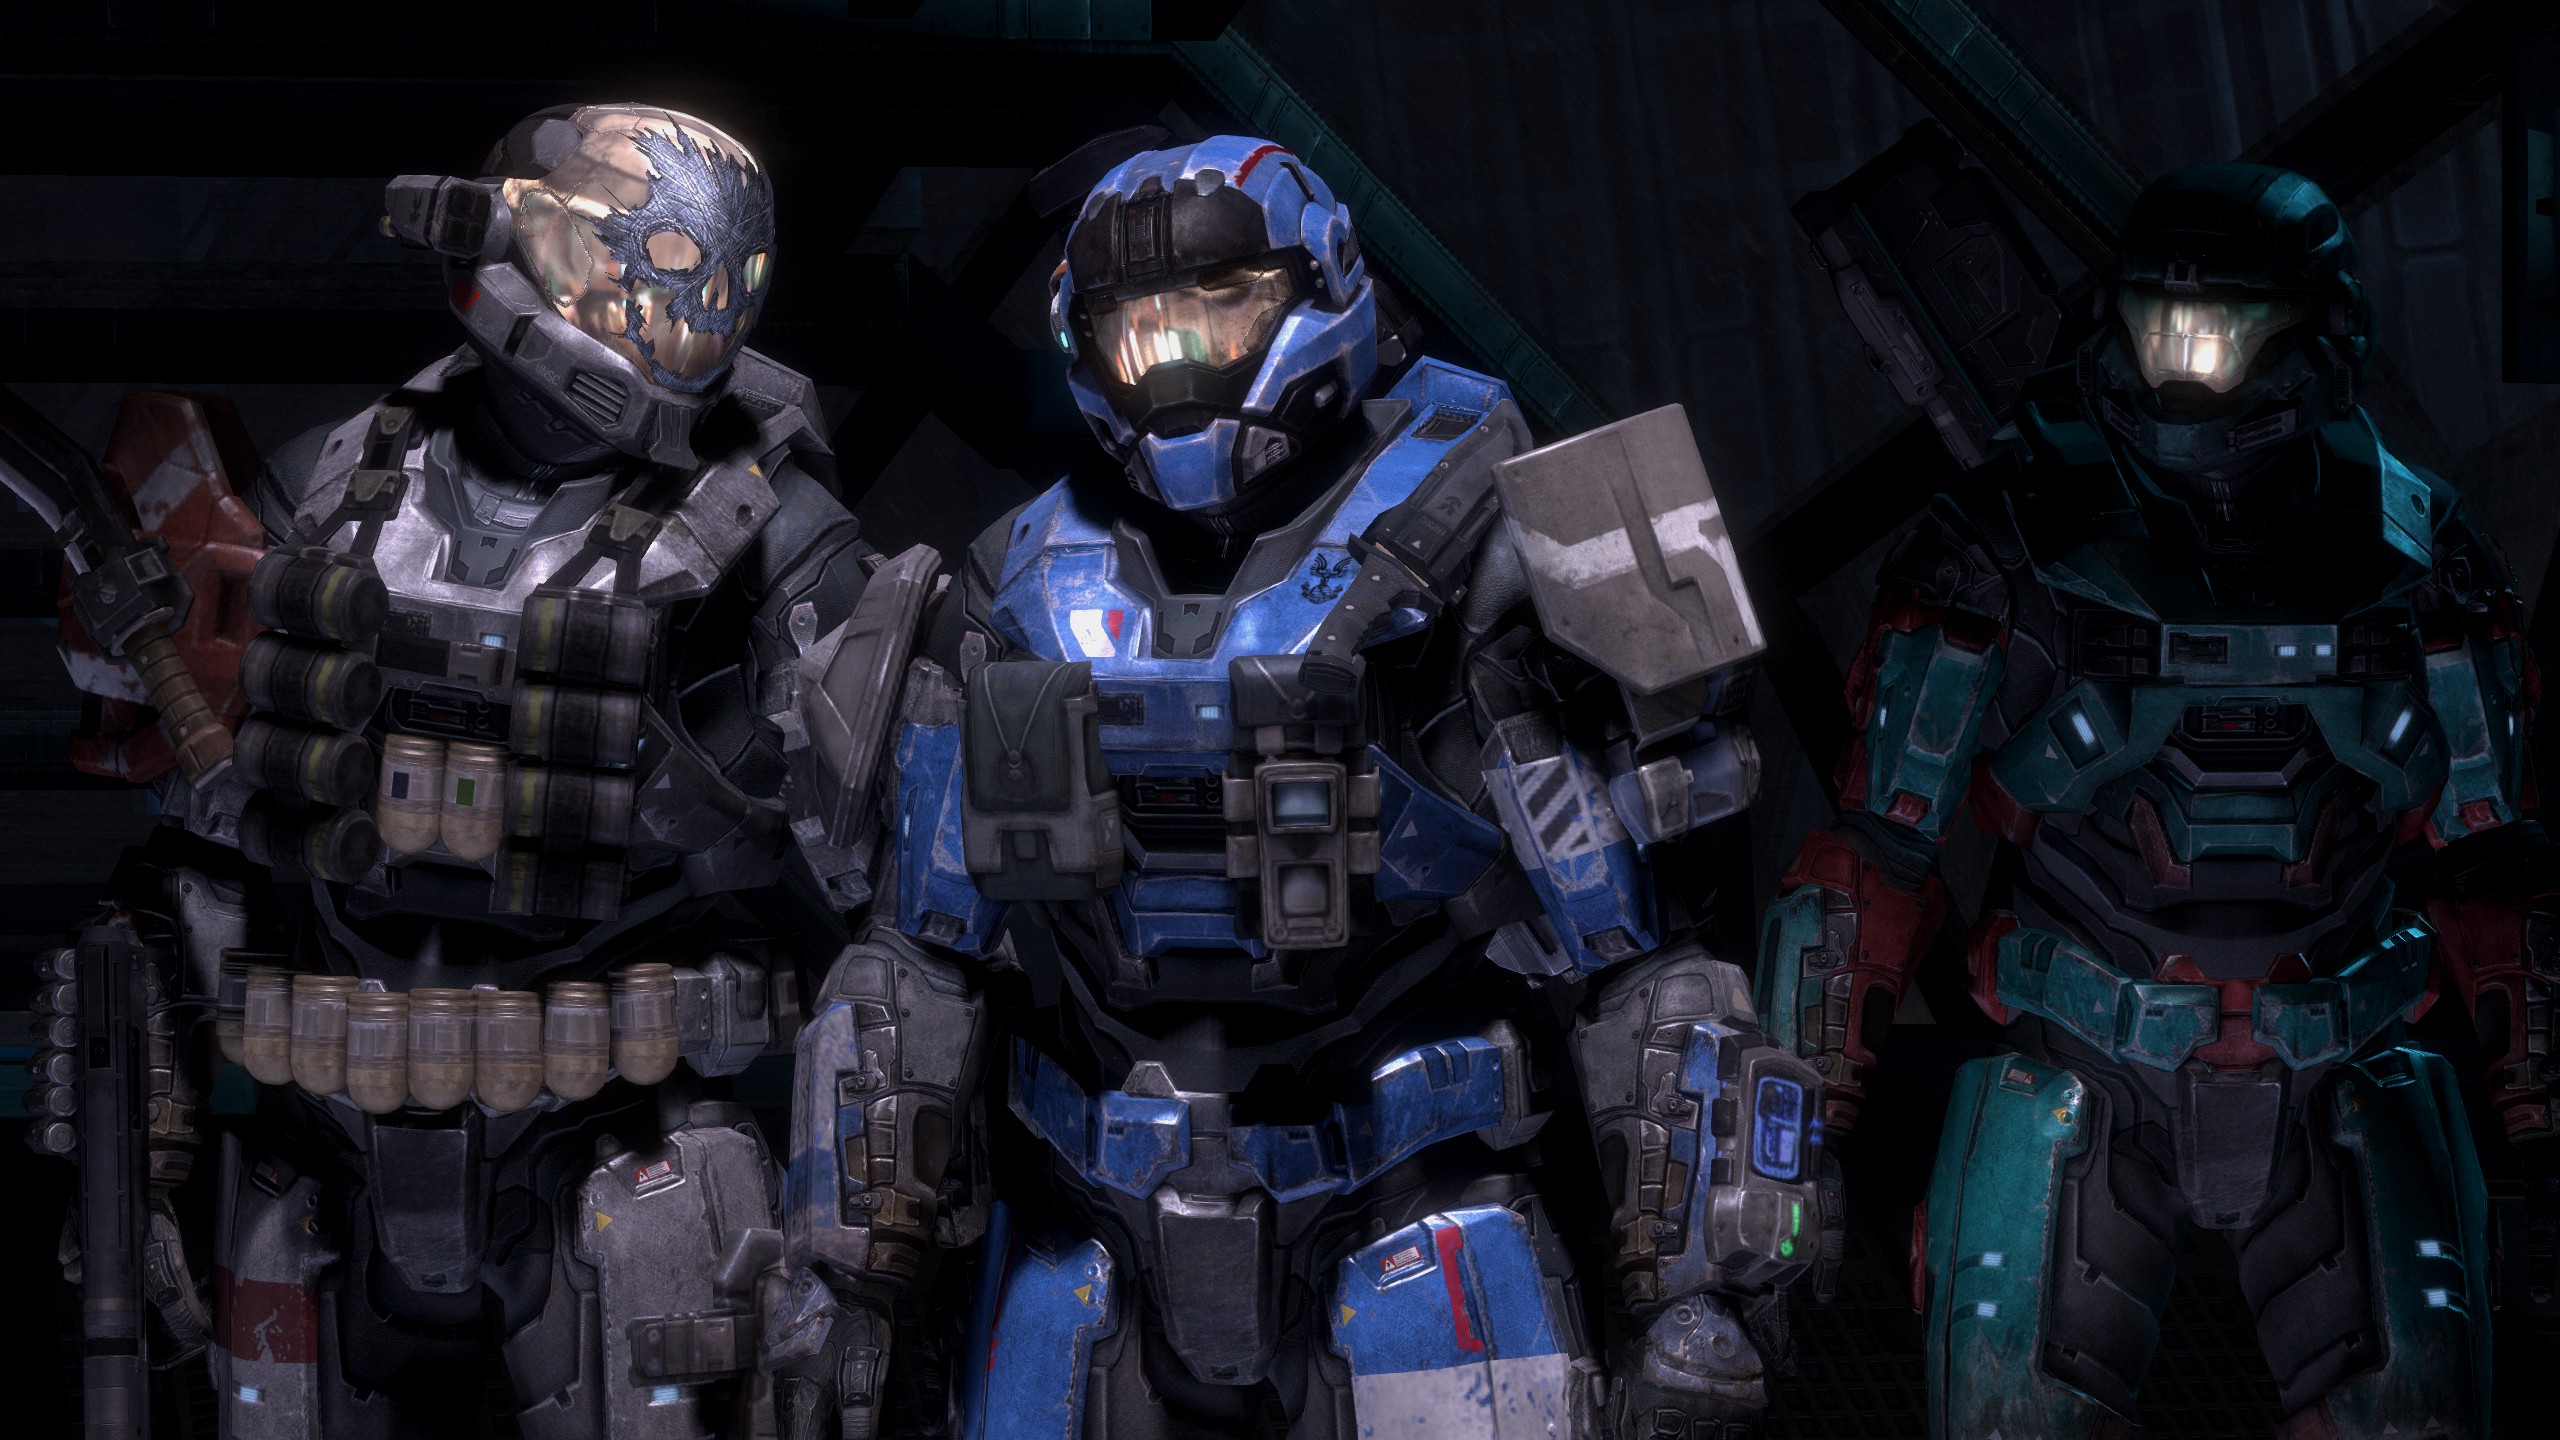 Play the Halo: Reach campaign in third person with this mod | PC Gamer